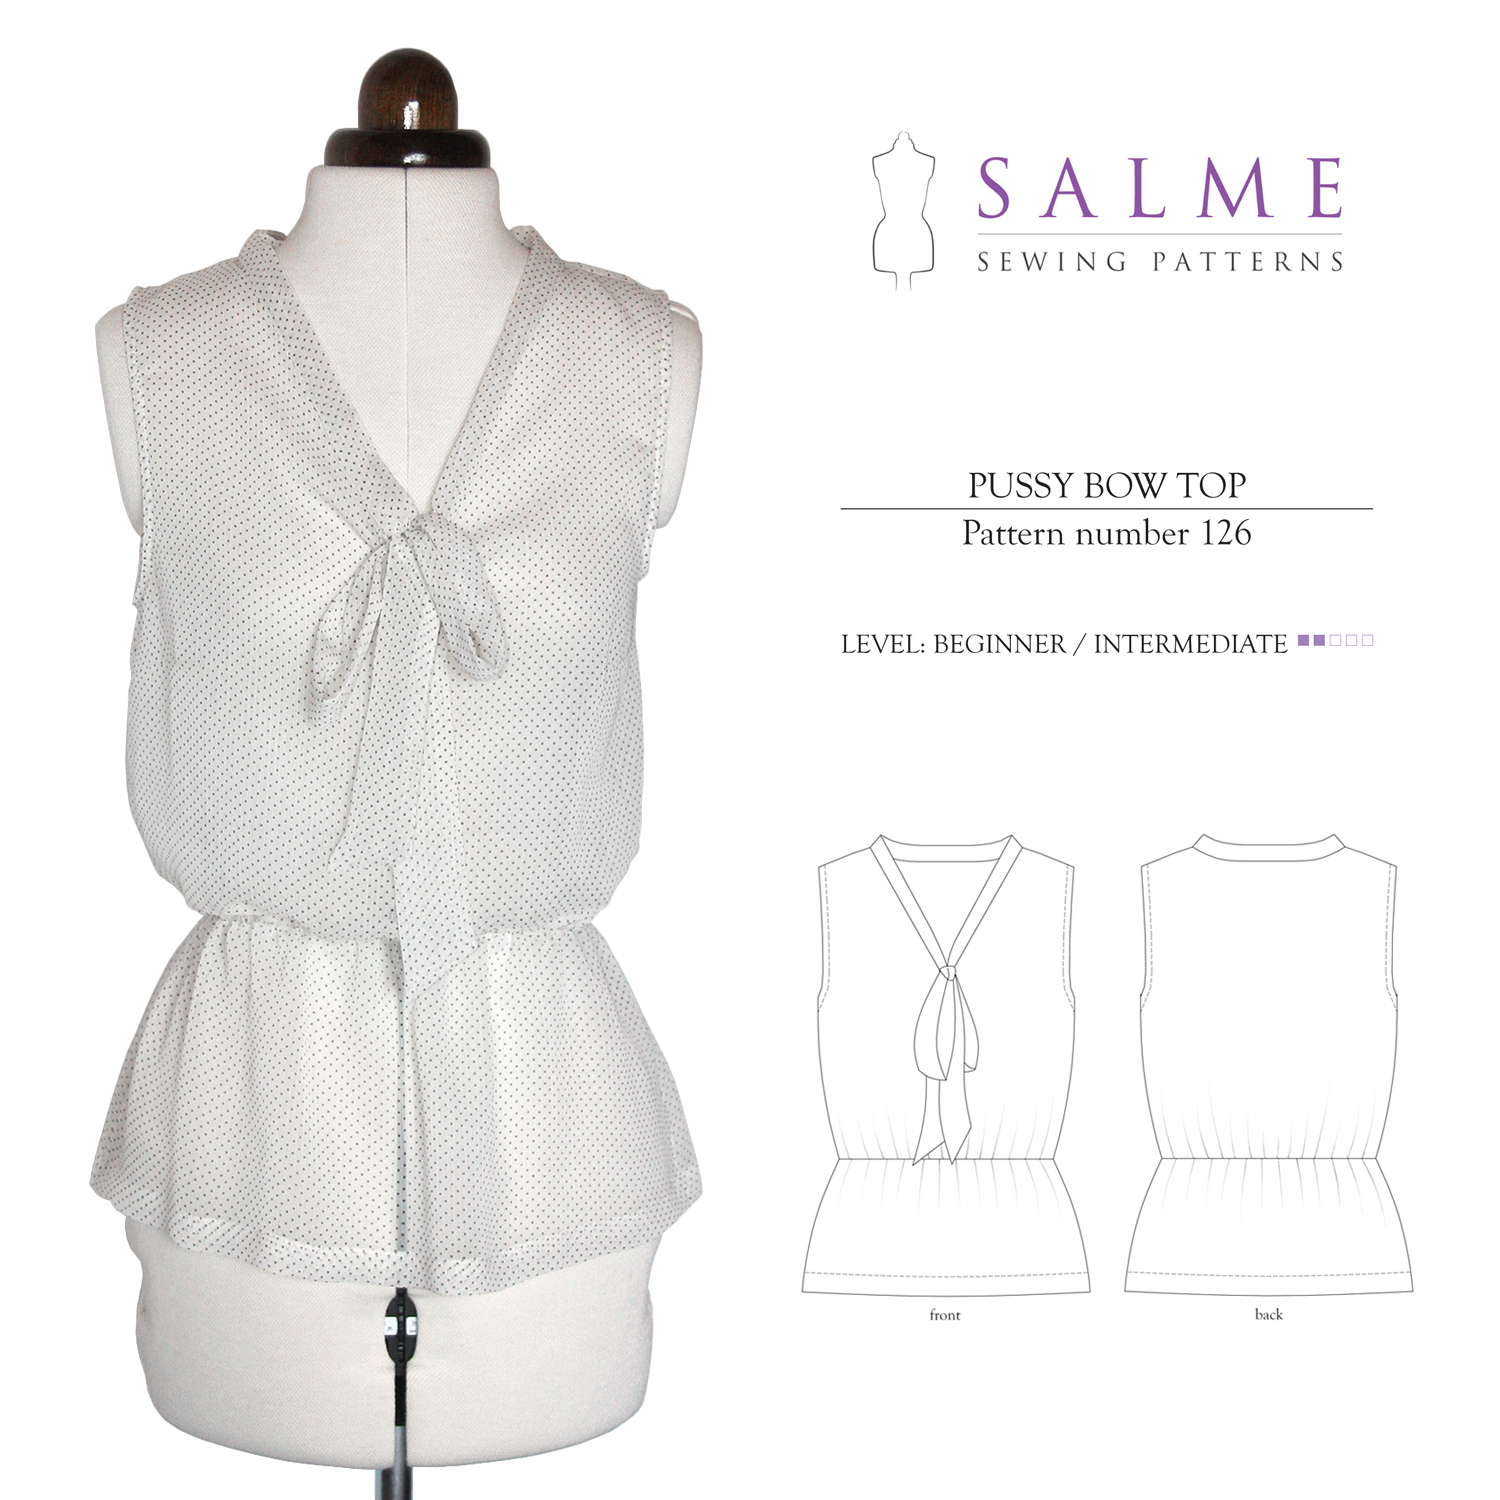 Salme Sewing Patterns 126 Pussy Bow Blouse Downloadable Pattern